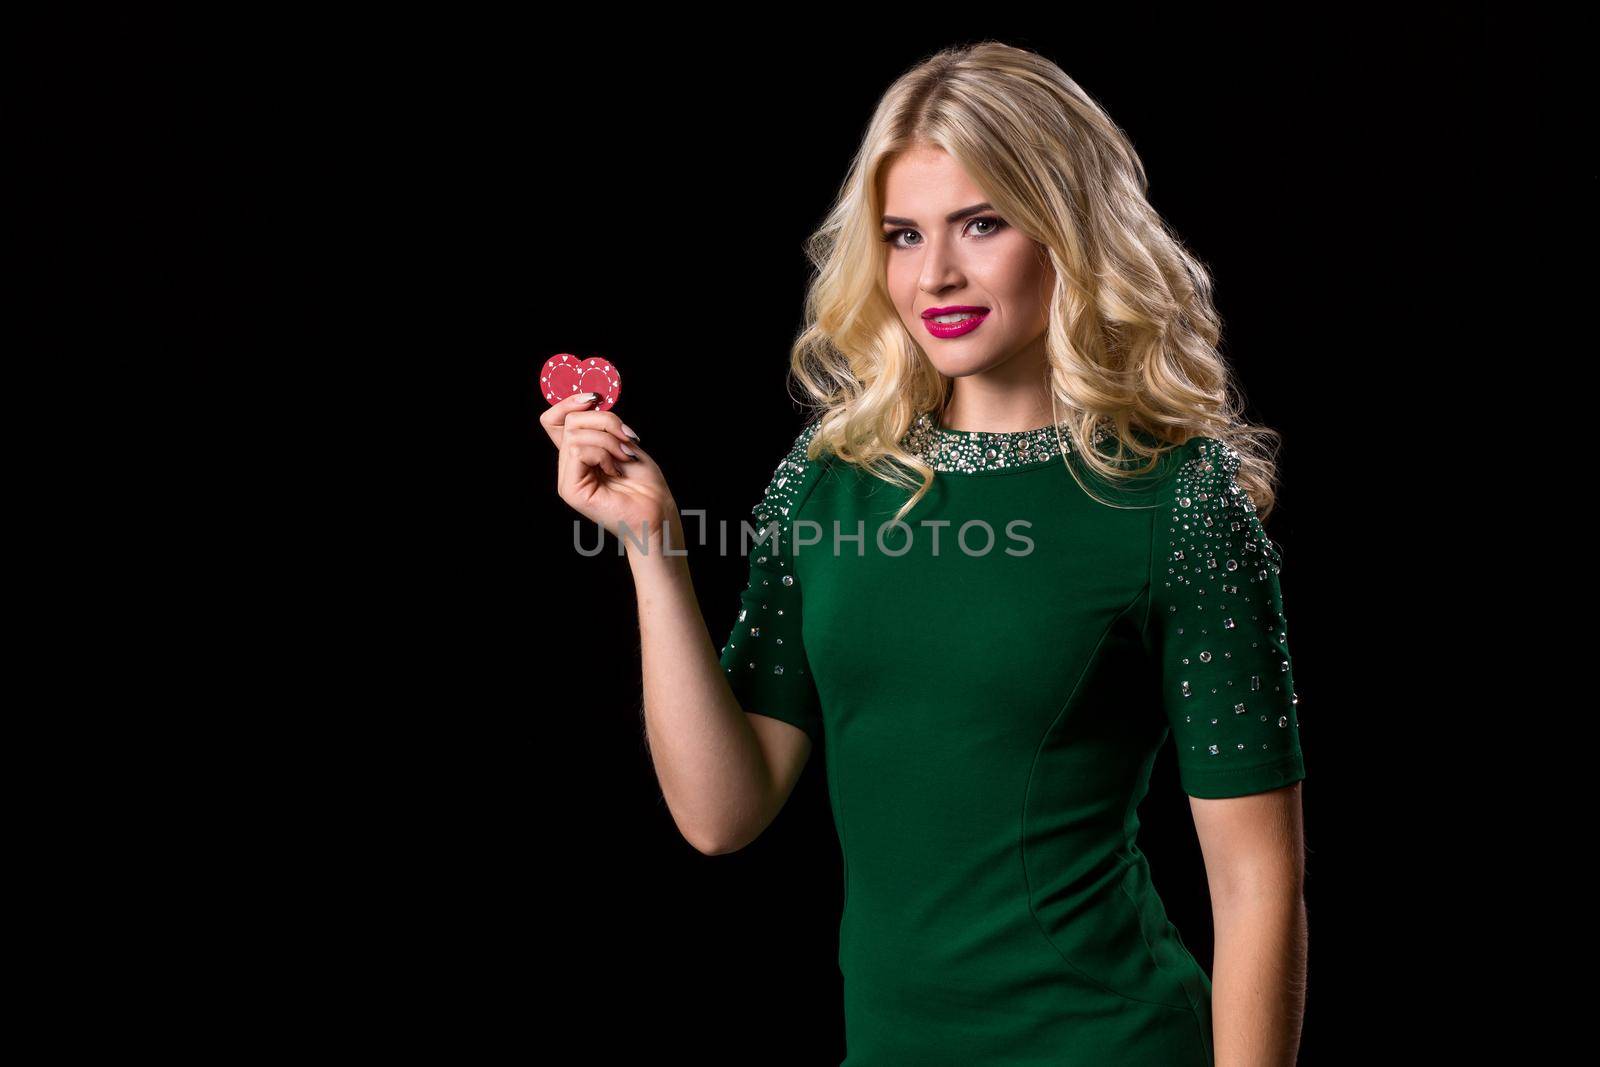 blonde woman posing with chips for gambling on black background